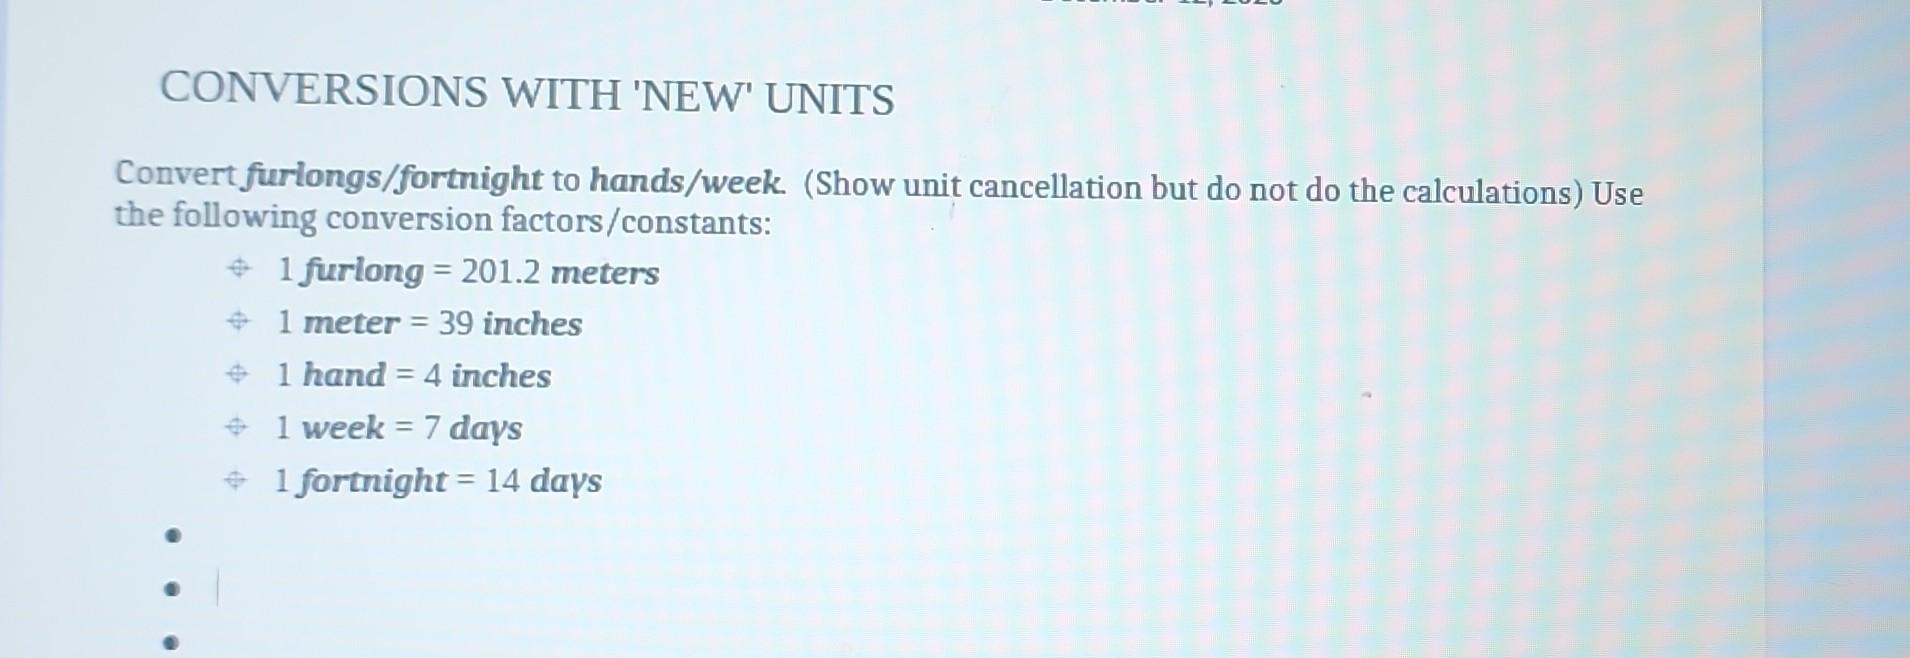 CONVERSIONS WITH 'NEW' UNITS Convert furlongs/fortnight to hands/week. (Show unit cancellation but do not do